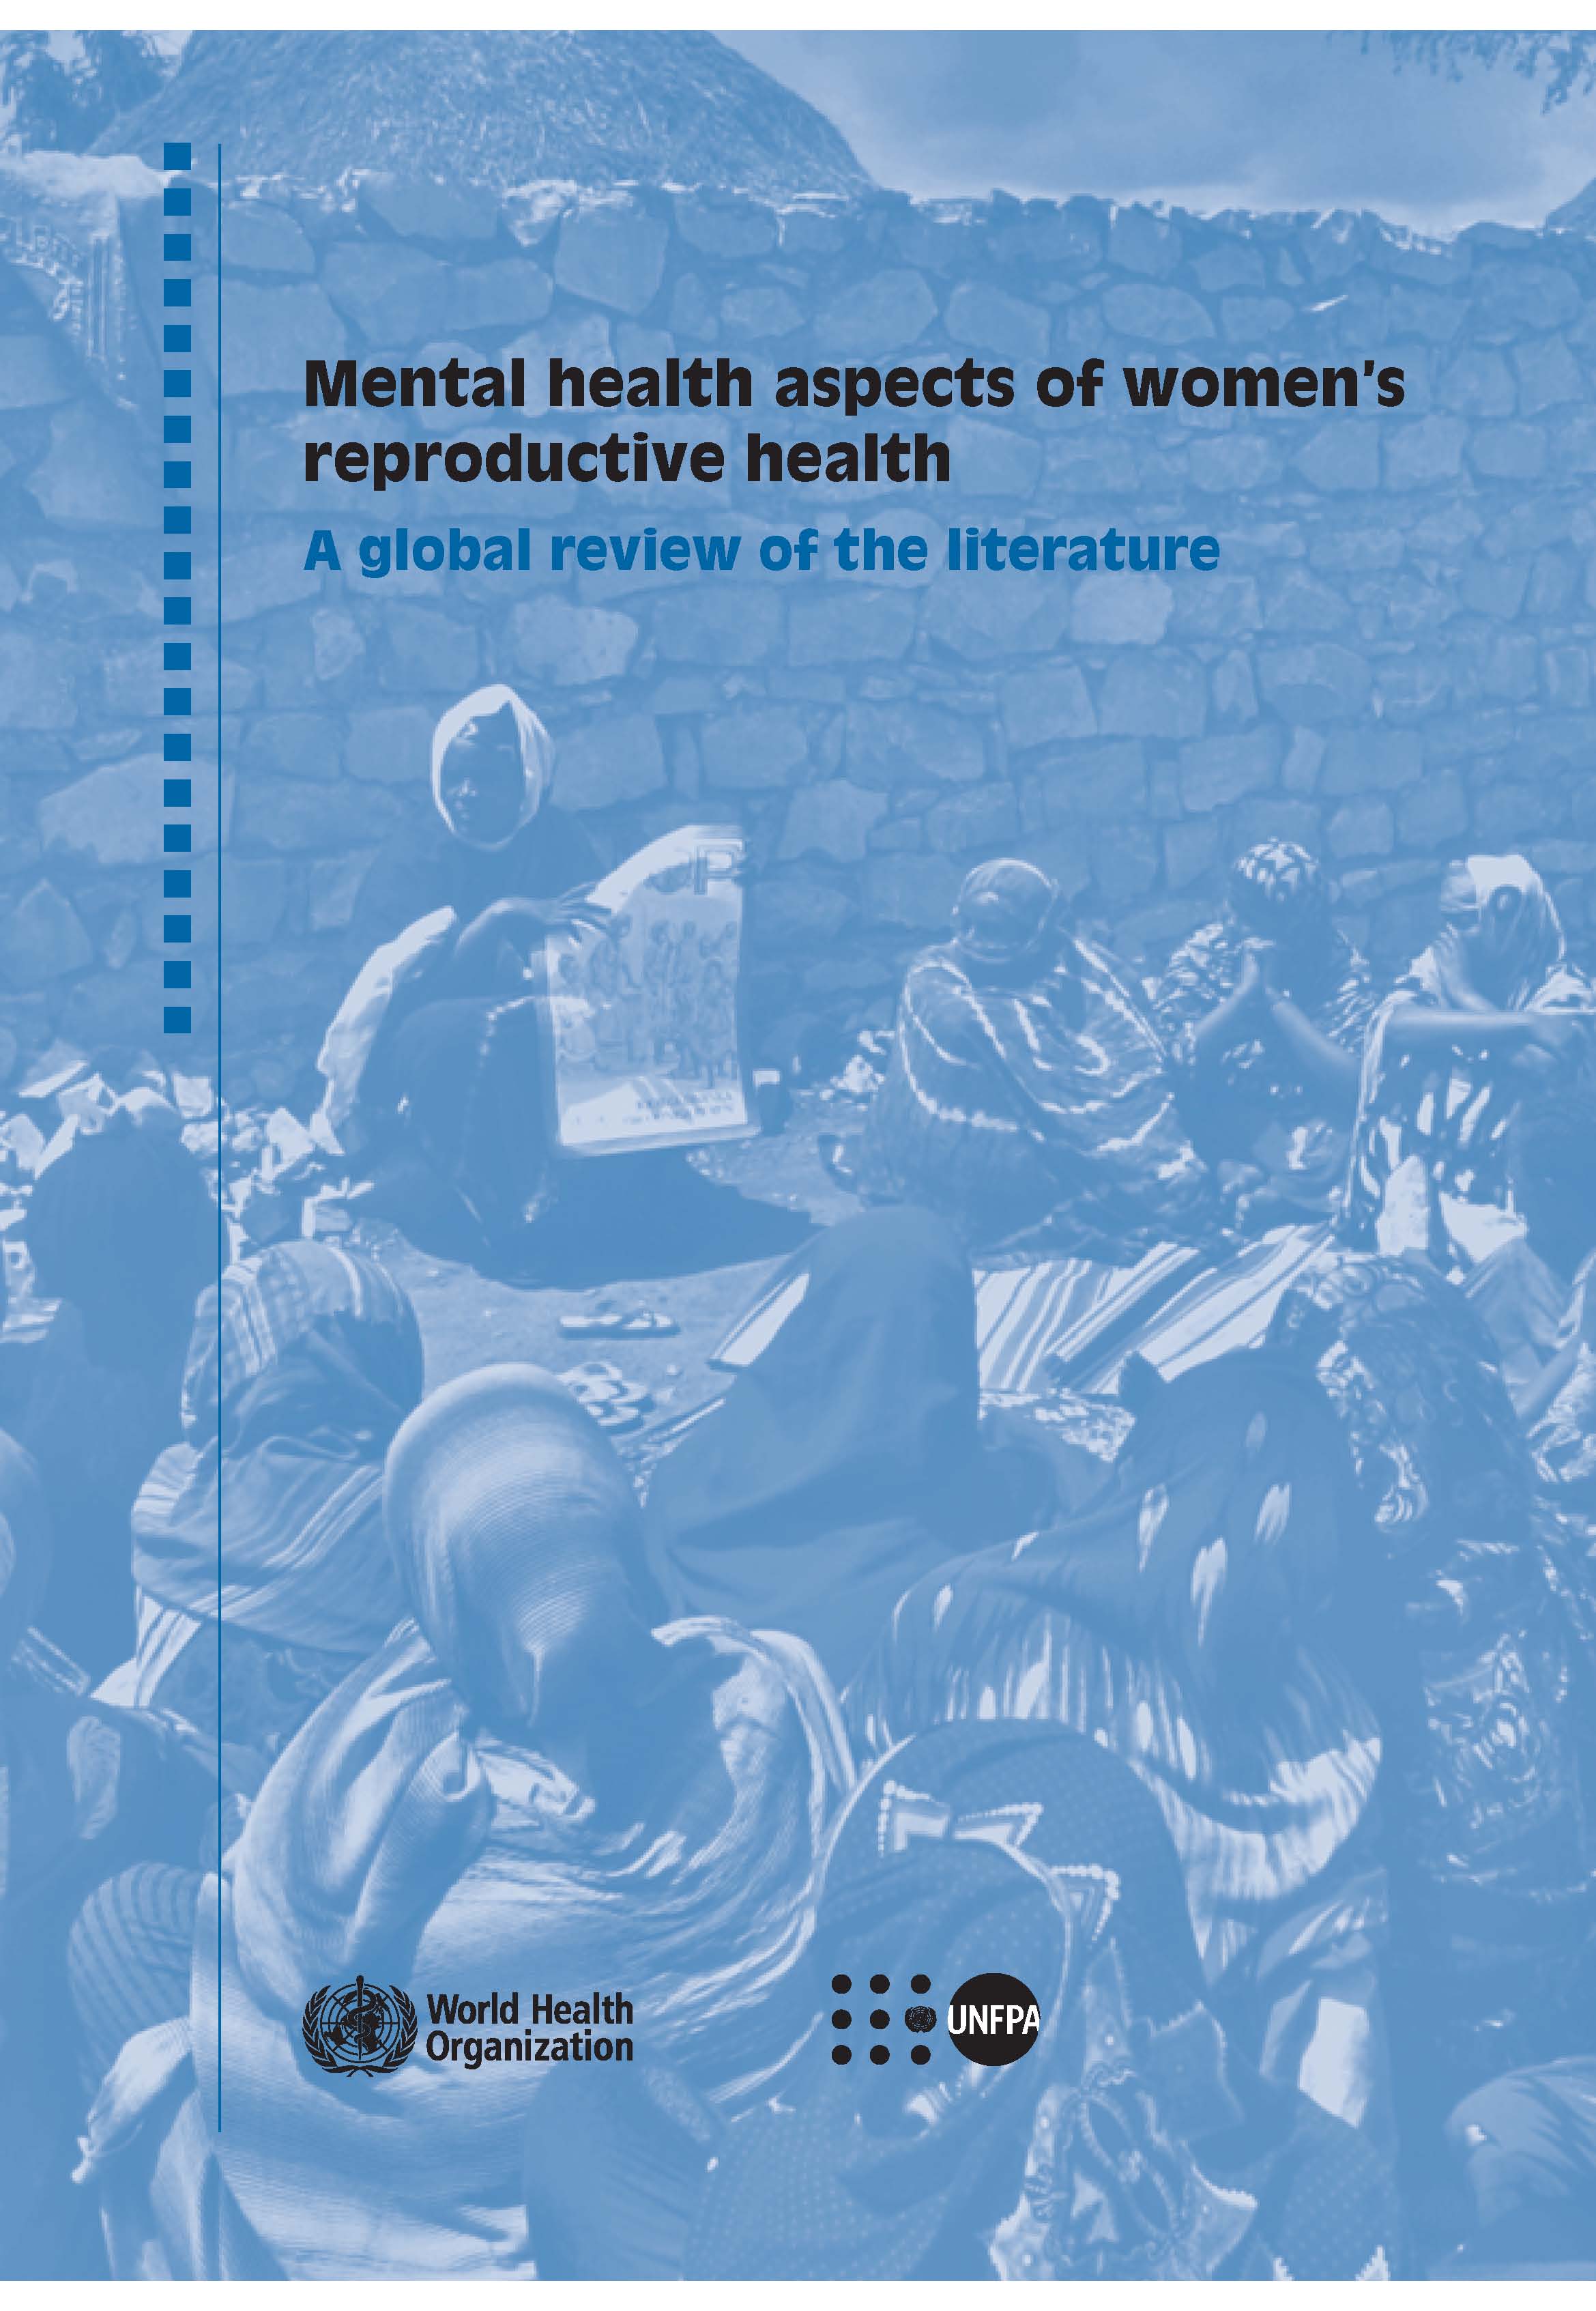 Mental health aspects of women's reproductive health; A global review of the literature, WHO/UNFPA, 2009